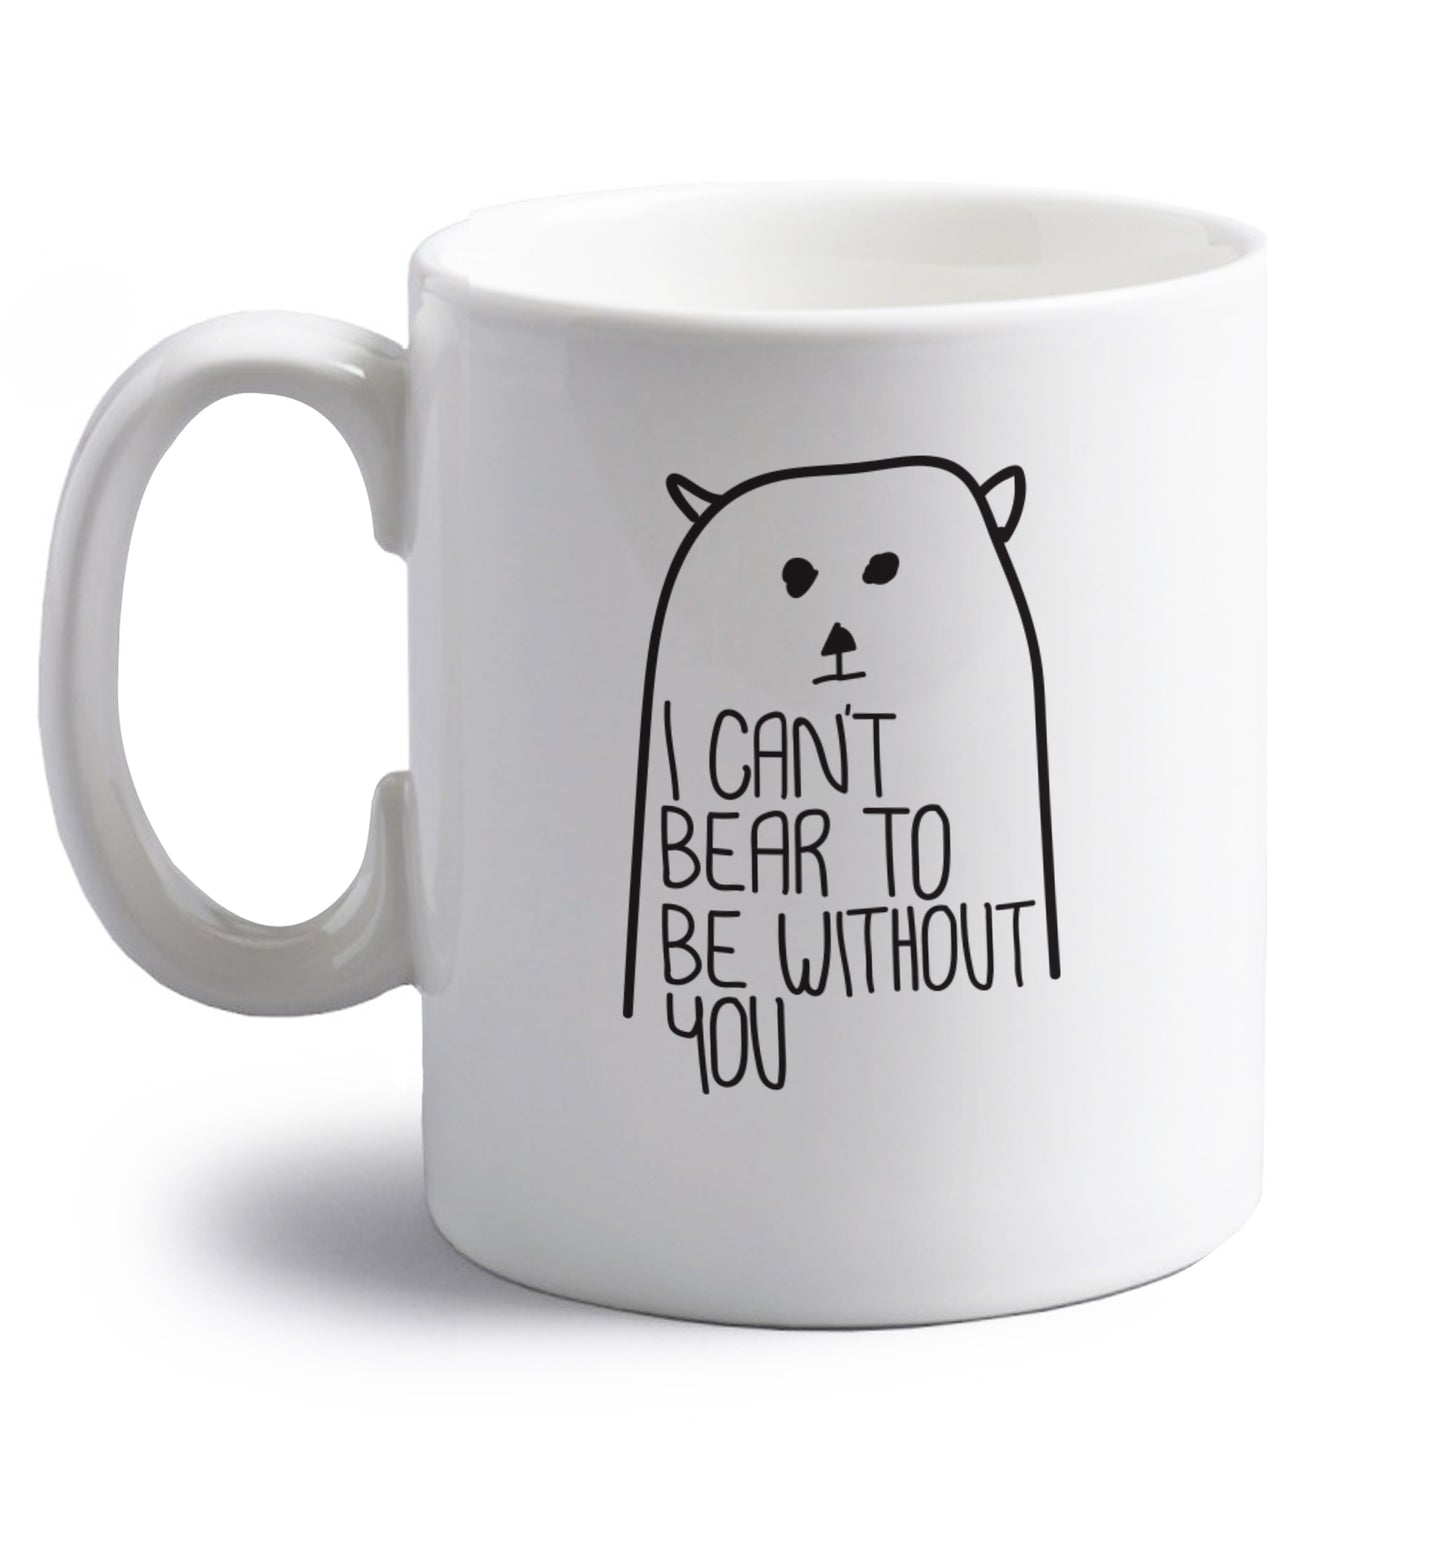 I can't bear to be without you right handed white ceramic mug 